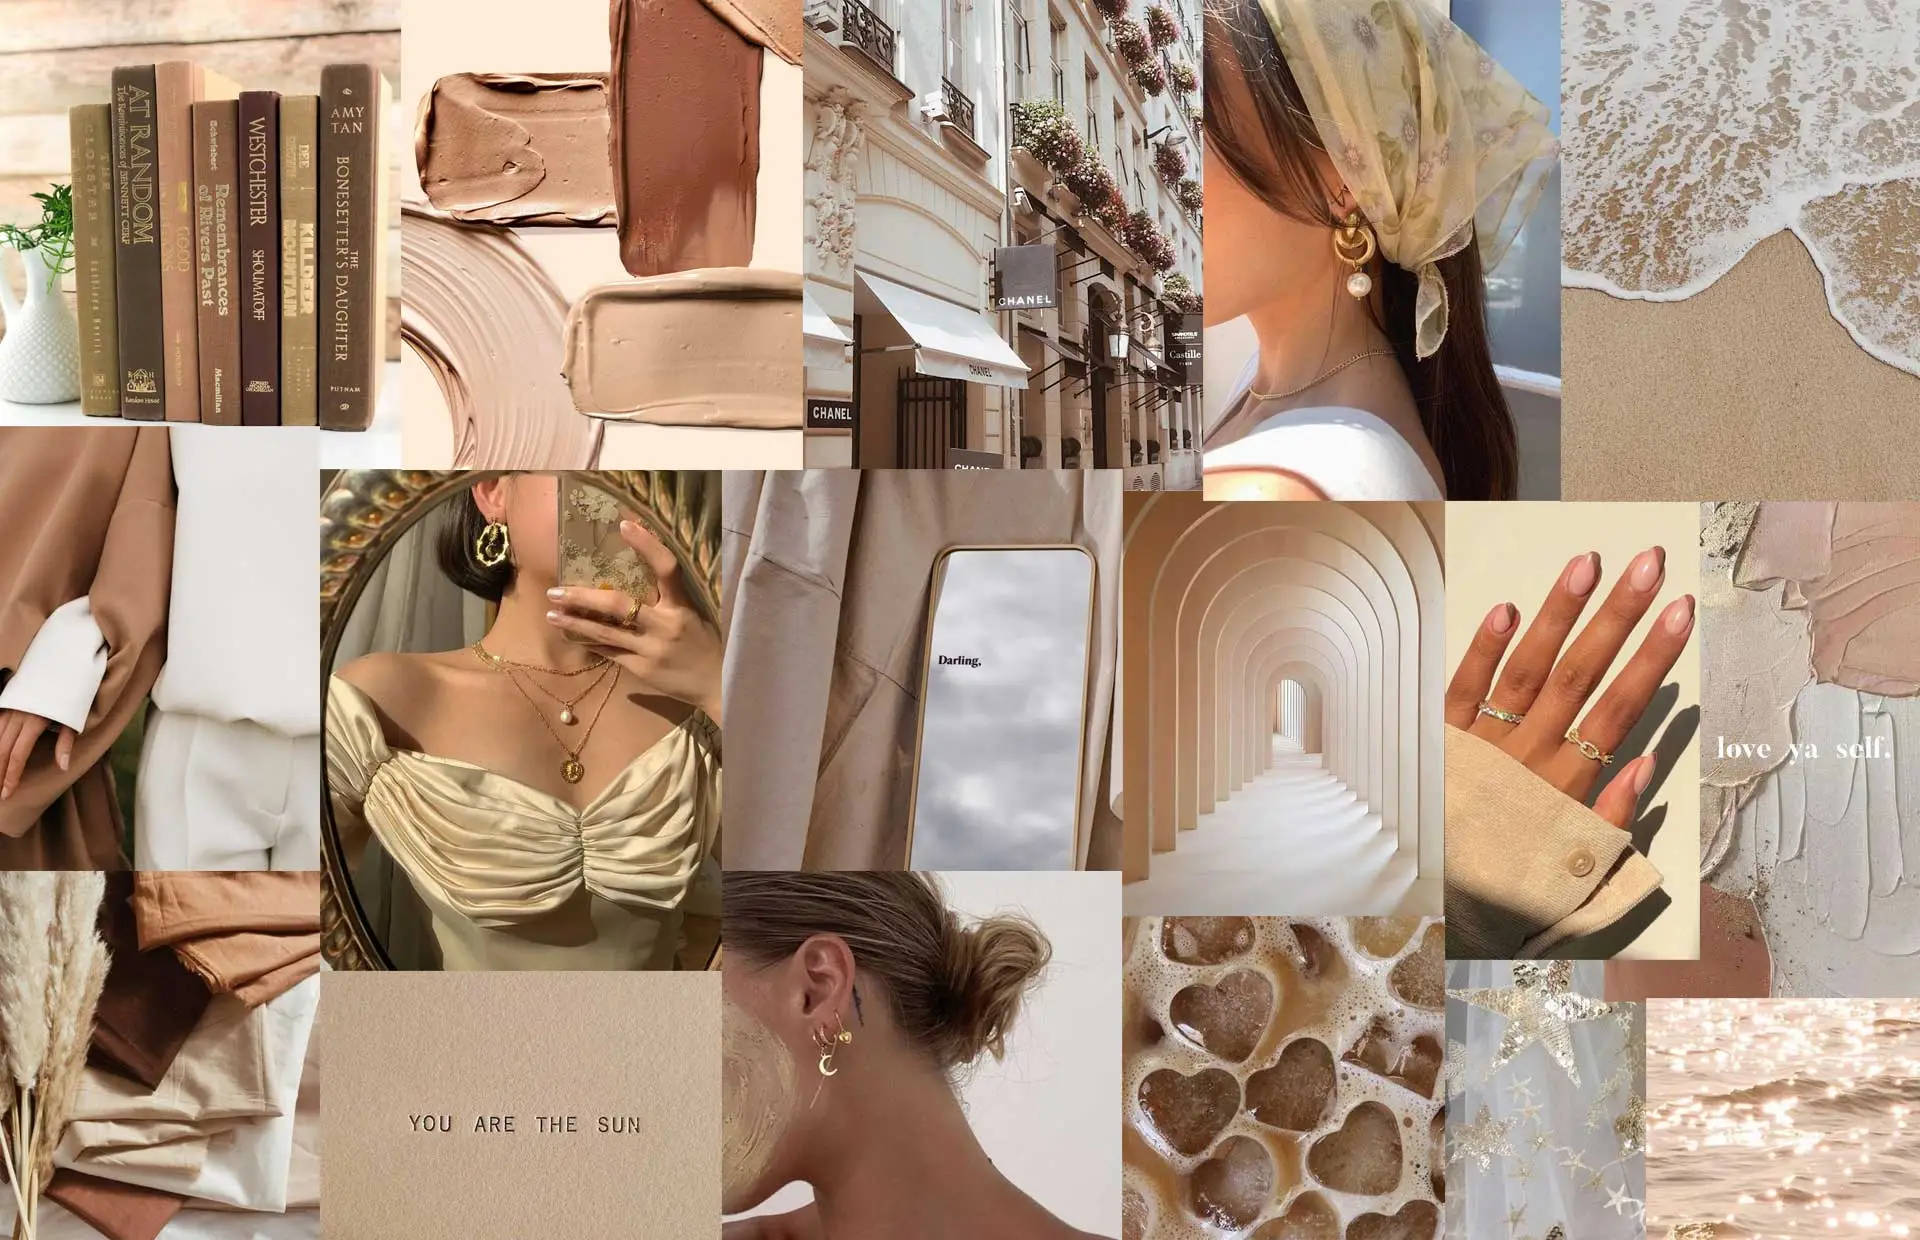 A collage of pictures with different colors - Beige, collage